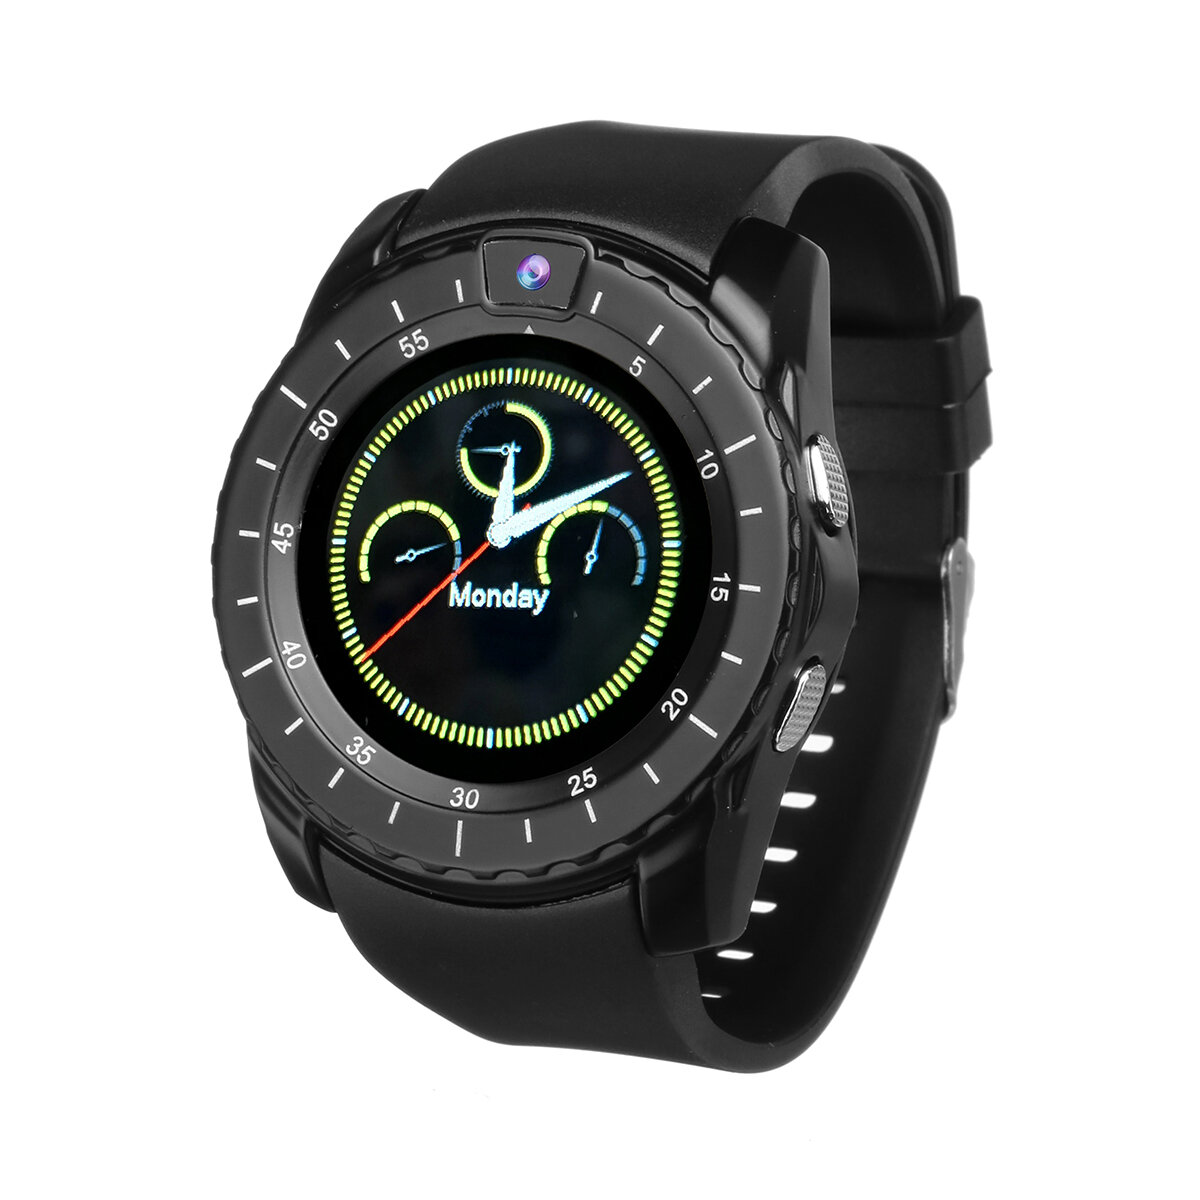 Bakeey V8s 1.22' IPS Curved Screen GSM Watch Phone Sleep Monitor Music Player Remote Camera Smart Wa